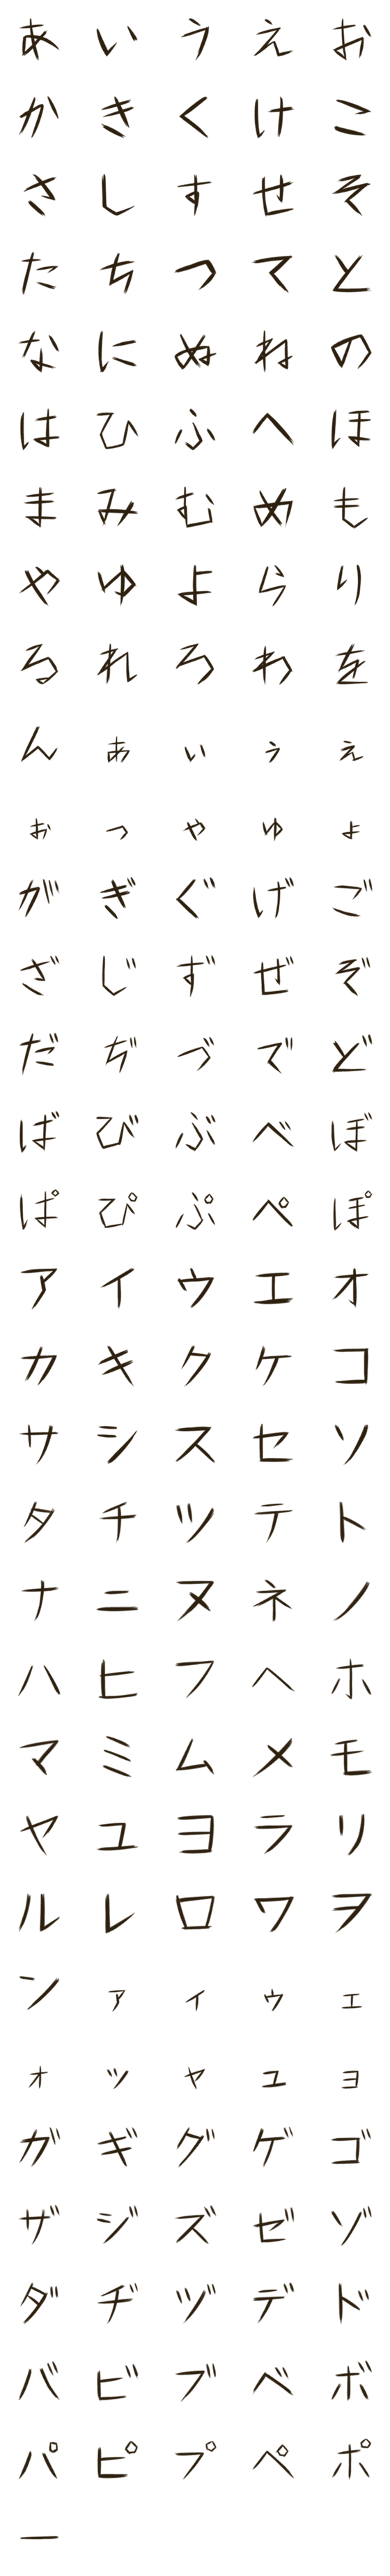 [LINE絵文字]ガタガタカクカク文字の画像一覧